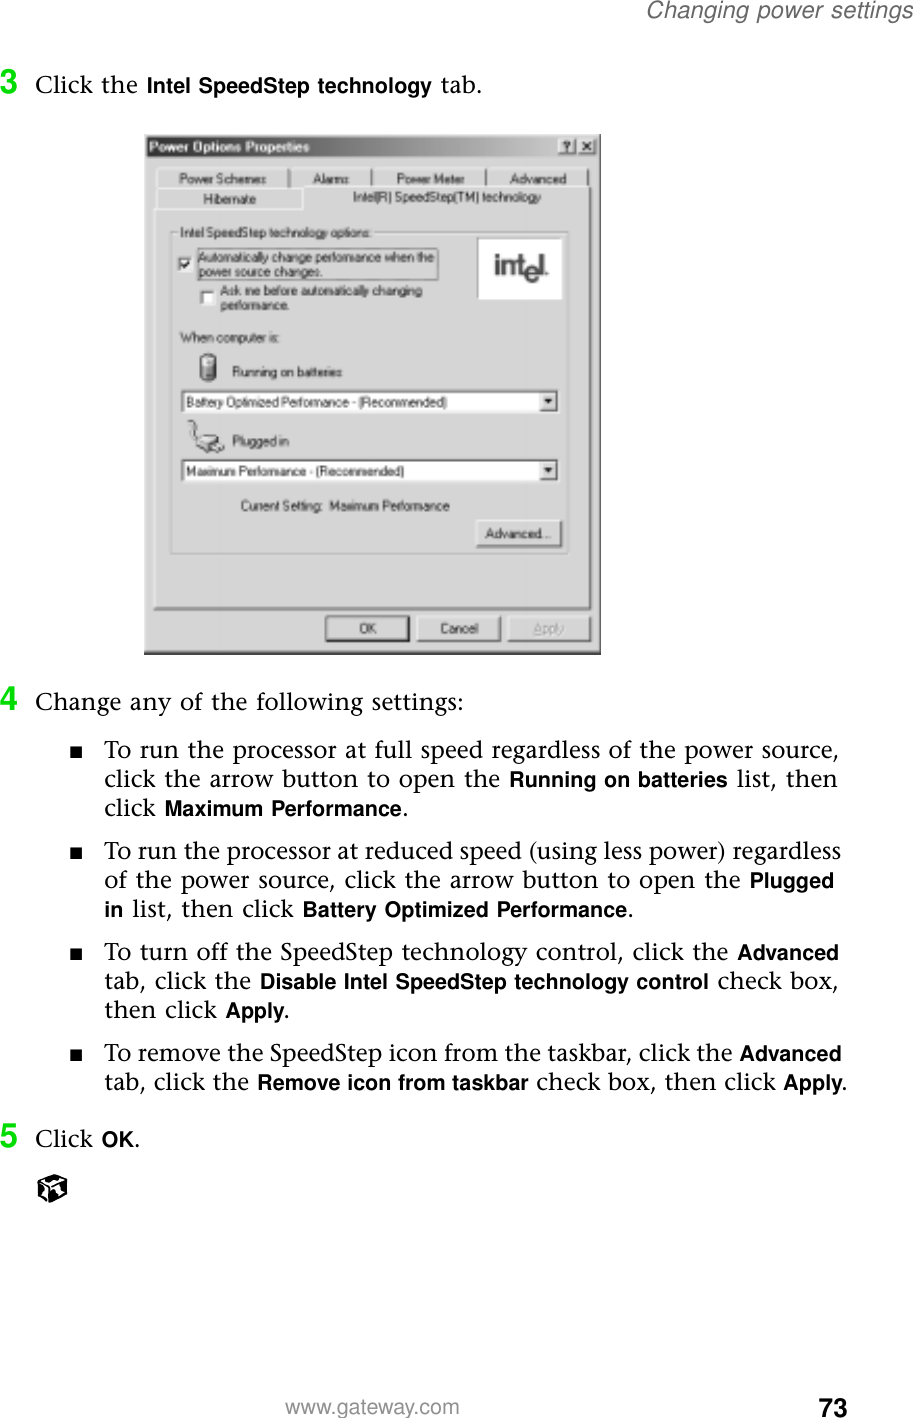 73Changing power settingswww.gateway.com3Click the Intel SpeedStep technology tab.4Change any of the following settings:■To run the processor at full speed regardless of the power source, click the arrow button to open the Running on batteries list, then click Maximum Performance.■To run the processor at reduced speed (using less power) regardless of the power source, click the arrow button to open the Plugged in list, then click Battery Optimized Performance.■To turn off the SpeedStep technology control, click the Advanced tab, click the Disable Intel SpeedStep technology control check box, then click Apply.■To remove the SpeedStep icon from the taskbar, click the Advanced tab, click the Remove icon from taskbar check box, then click Apply.5Click OK.